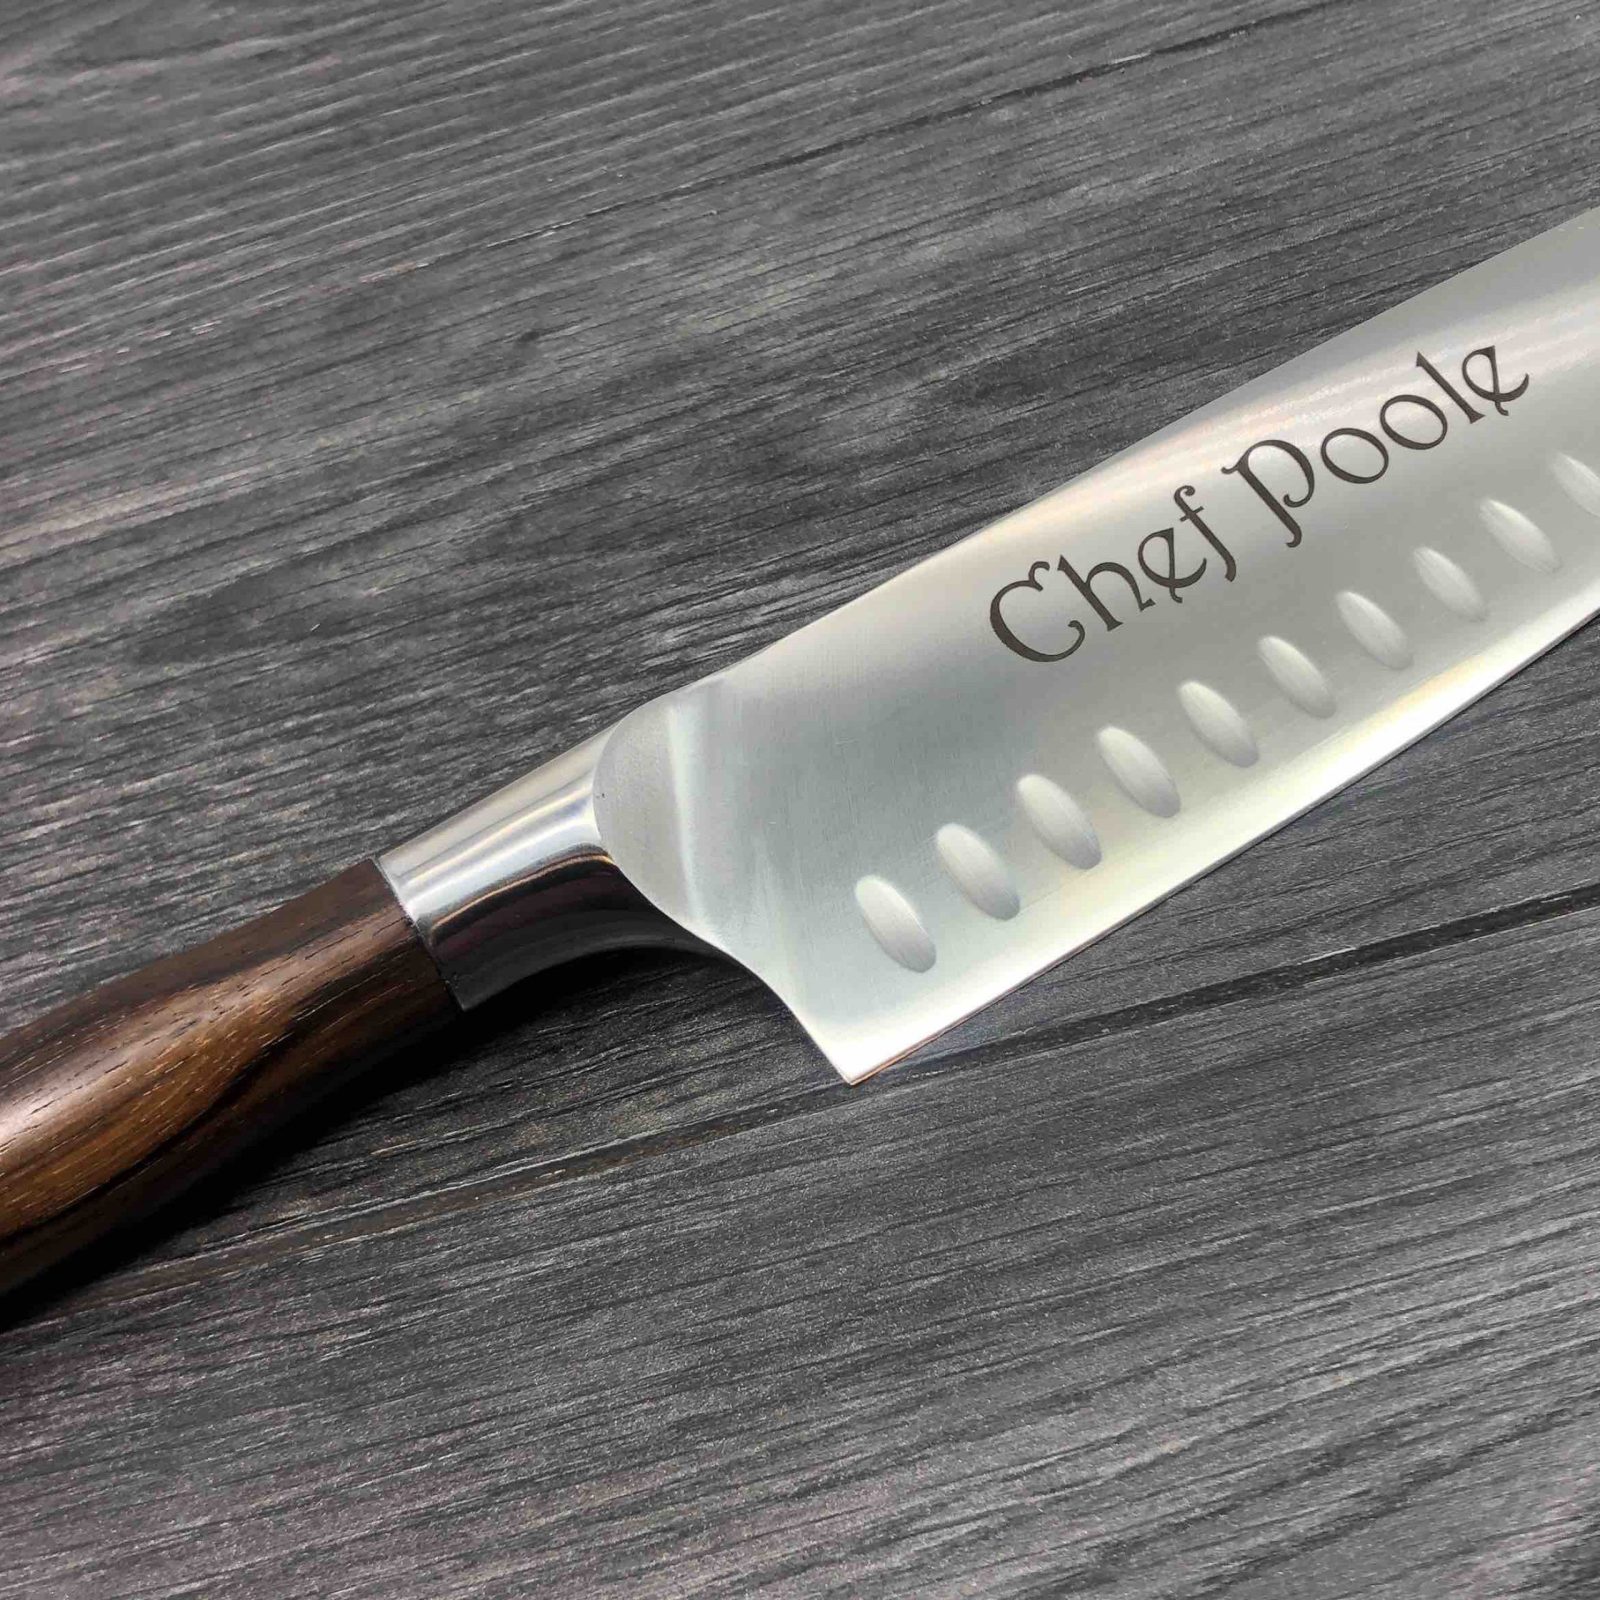 Unique luxury gifts : Craftstone Knives